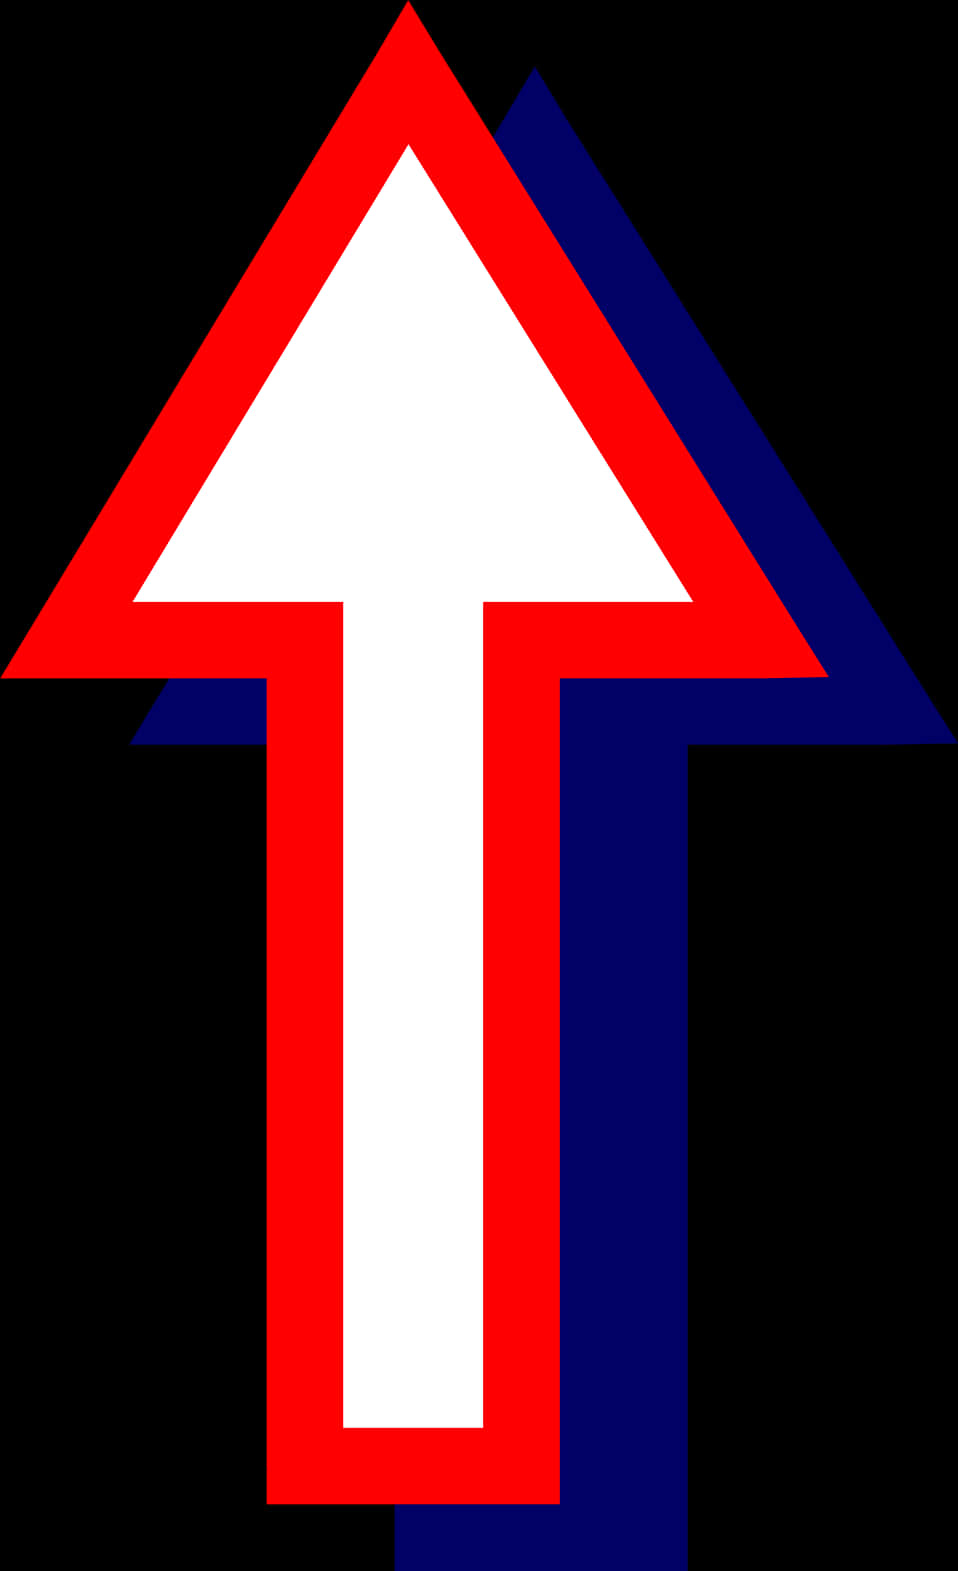 Redand Blue Arrows Graphic PNG